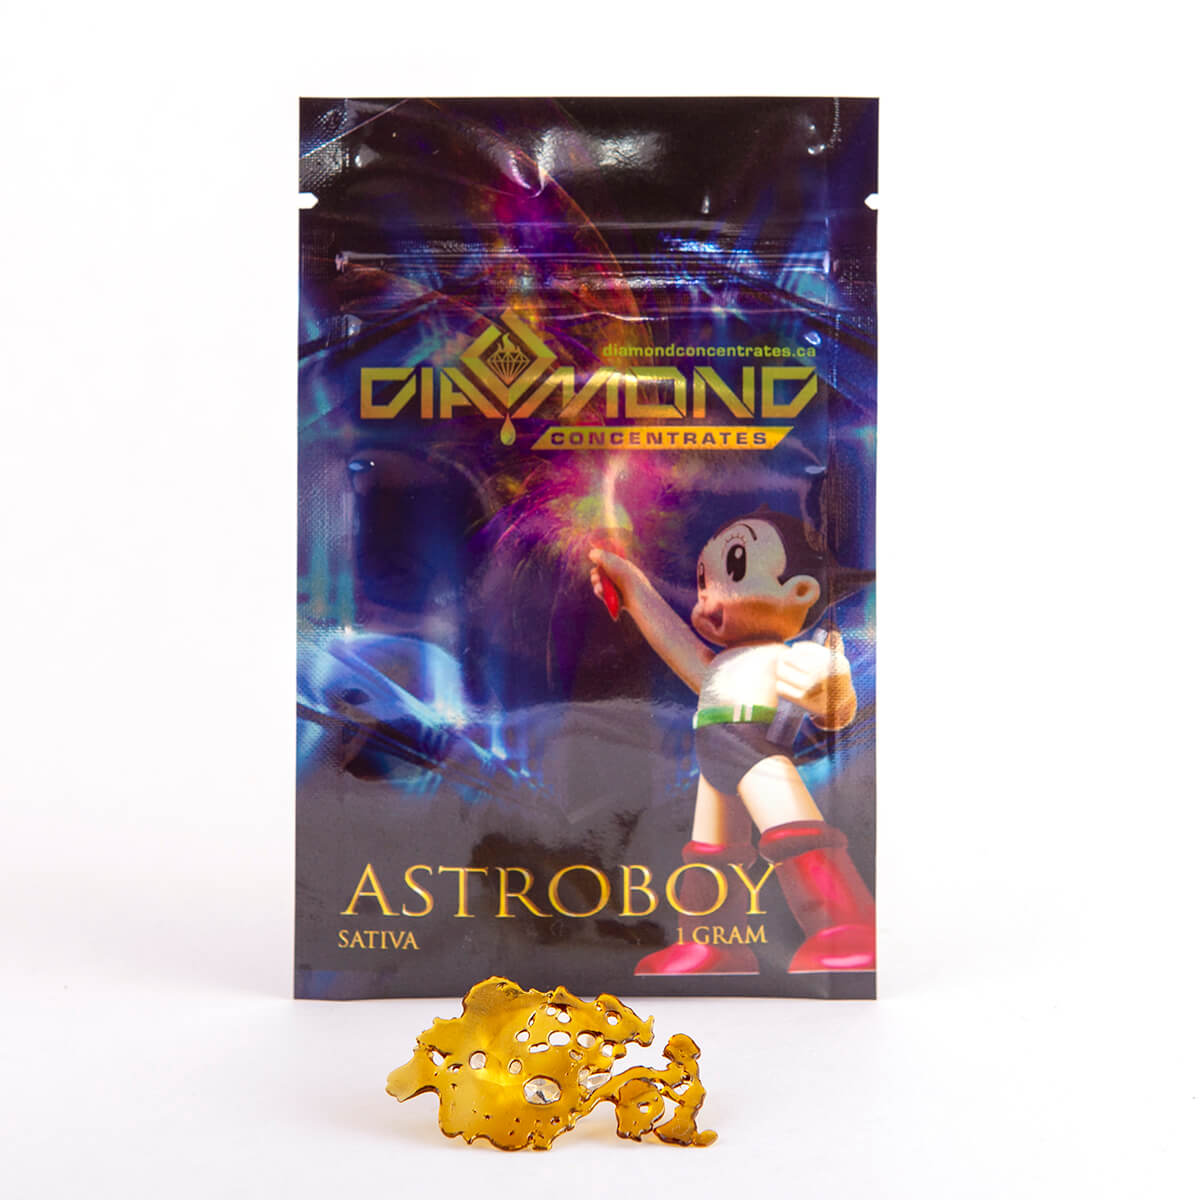 Astroboy Shatter by Diamond Concentrates